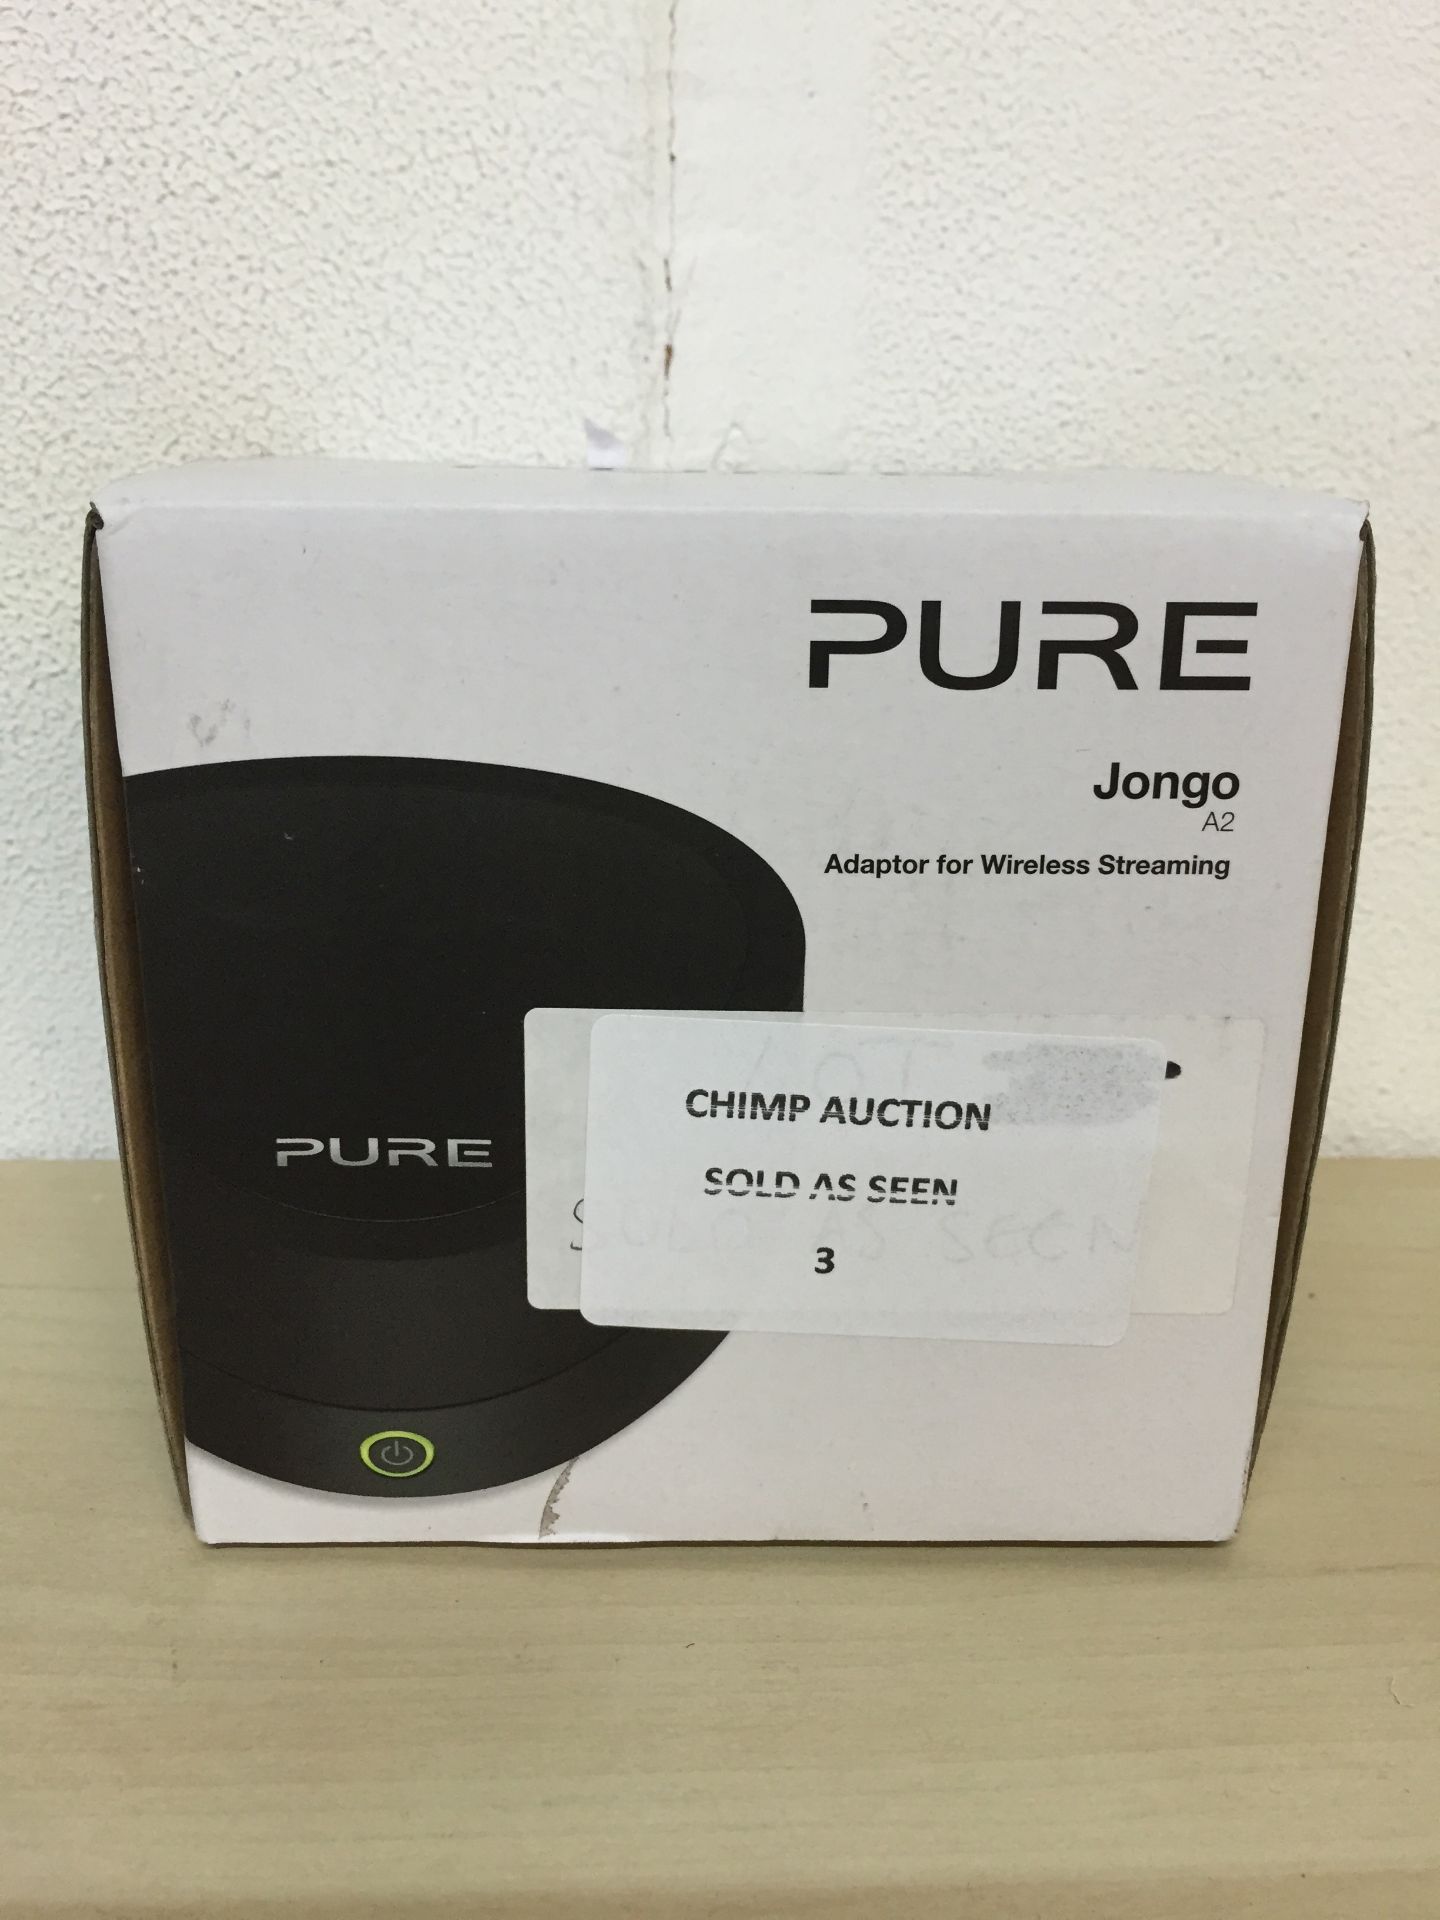 BOXED PURE JONGO A2 ADAPTOR FOR WIRELESS STREAMING RRP £49.99